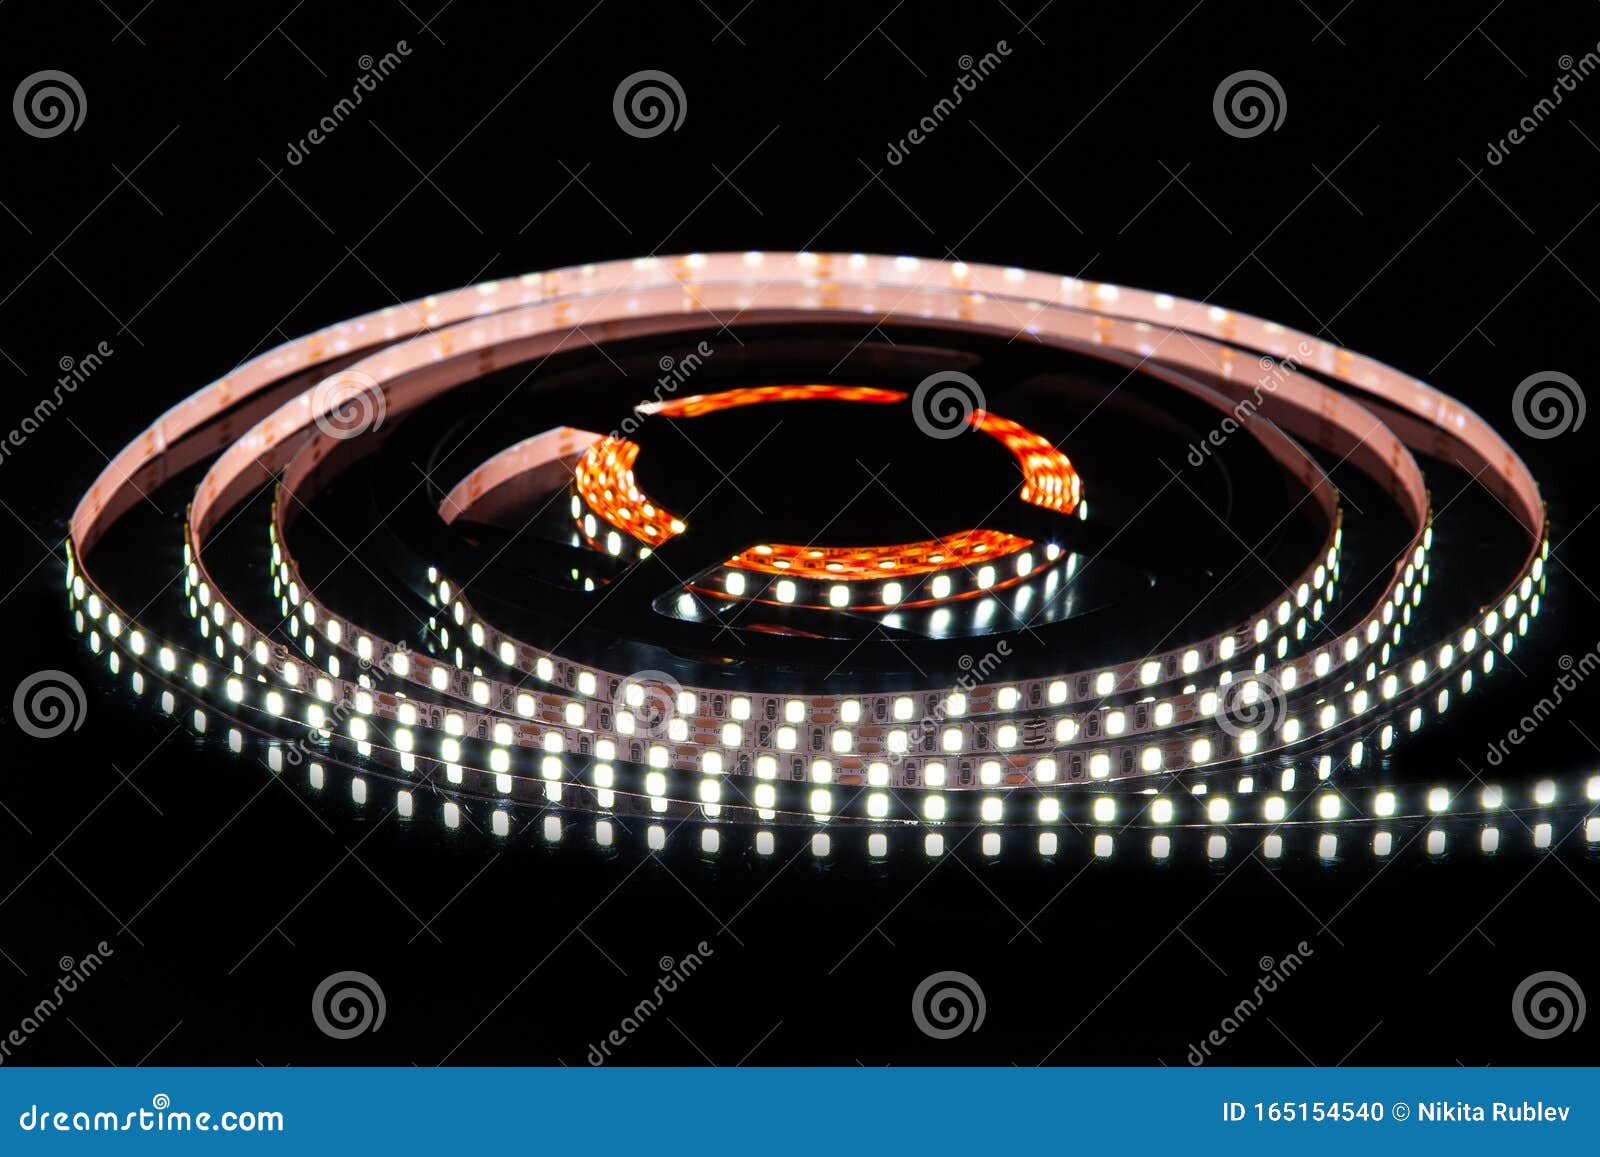 cold white led strip on reel with black background